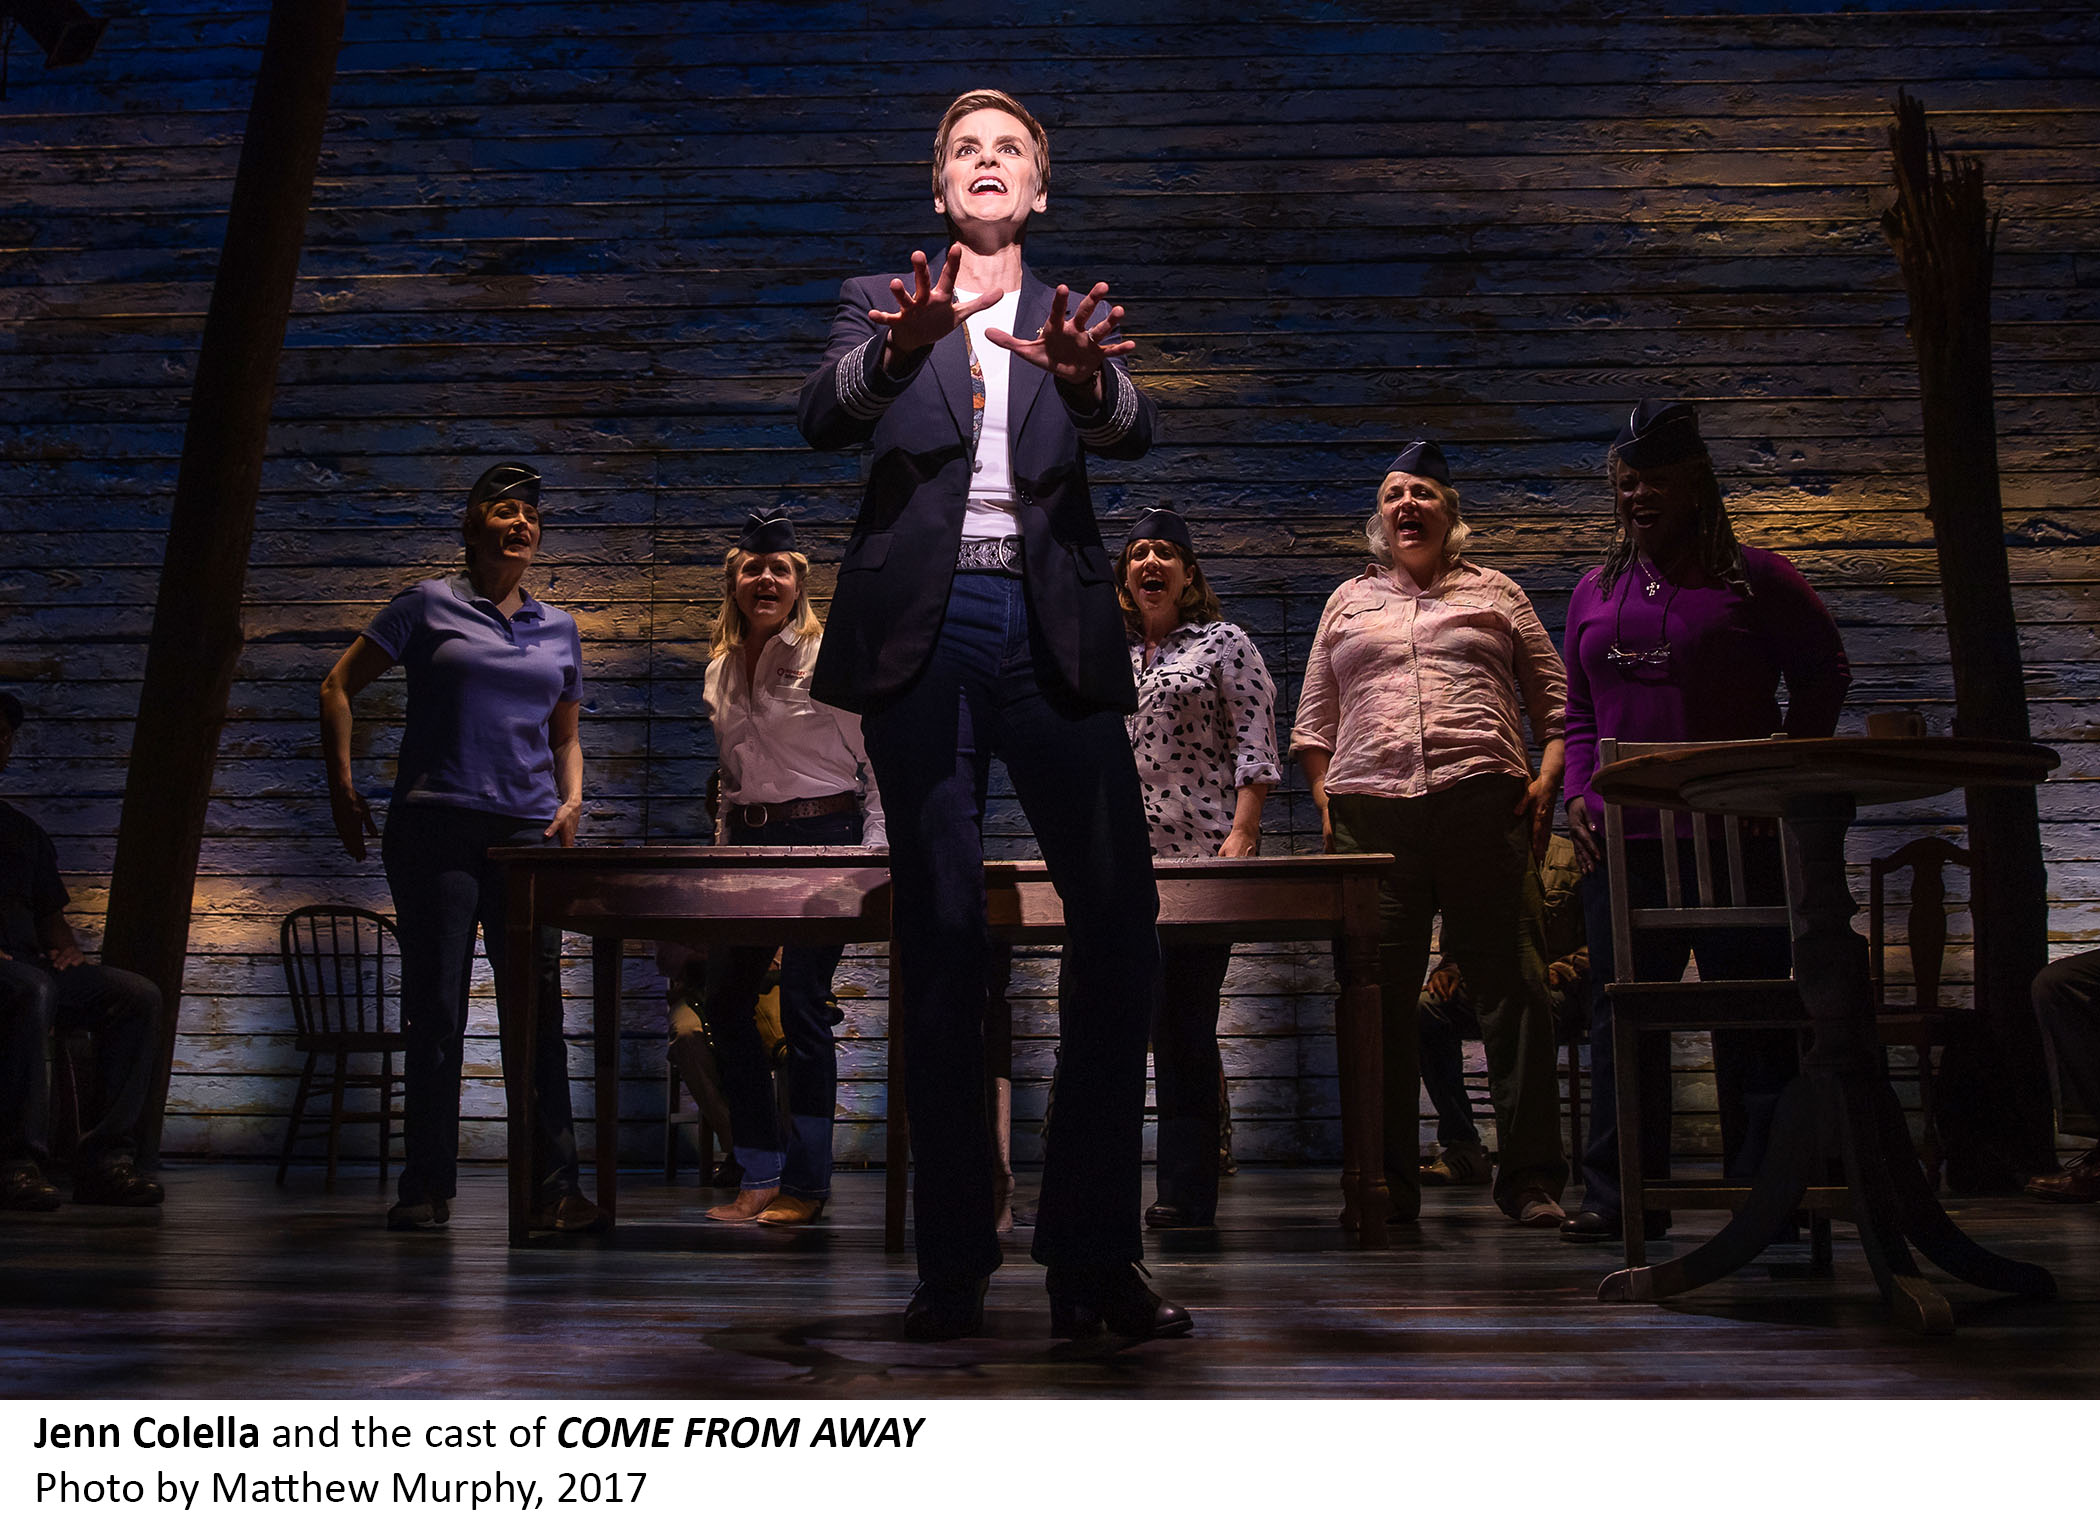 Jenn Colella and several other members of the cast of Come From Away perform onstage. Colella is gesturing as a spotlight shines on her.